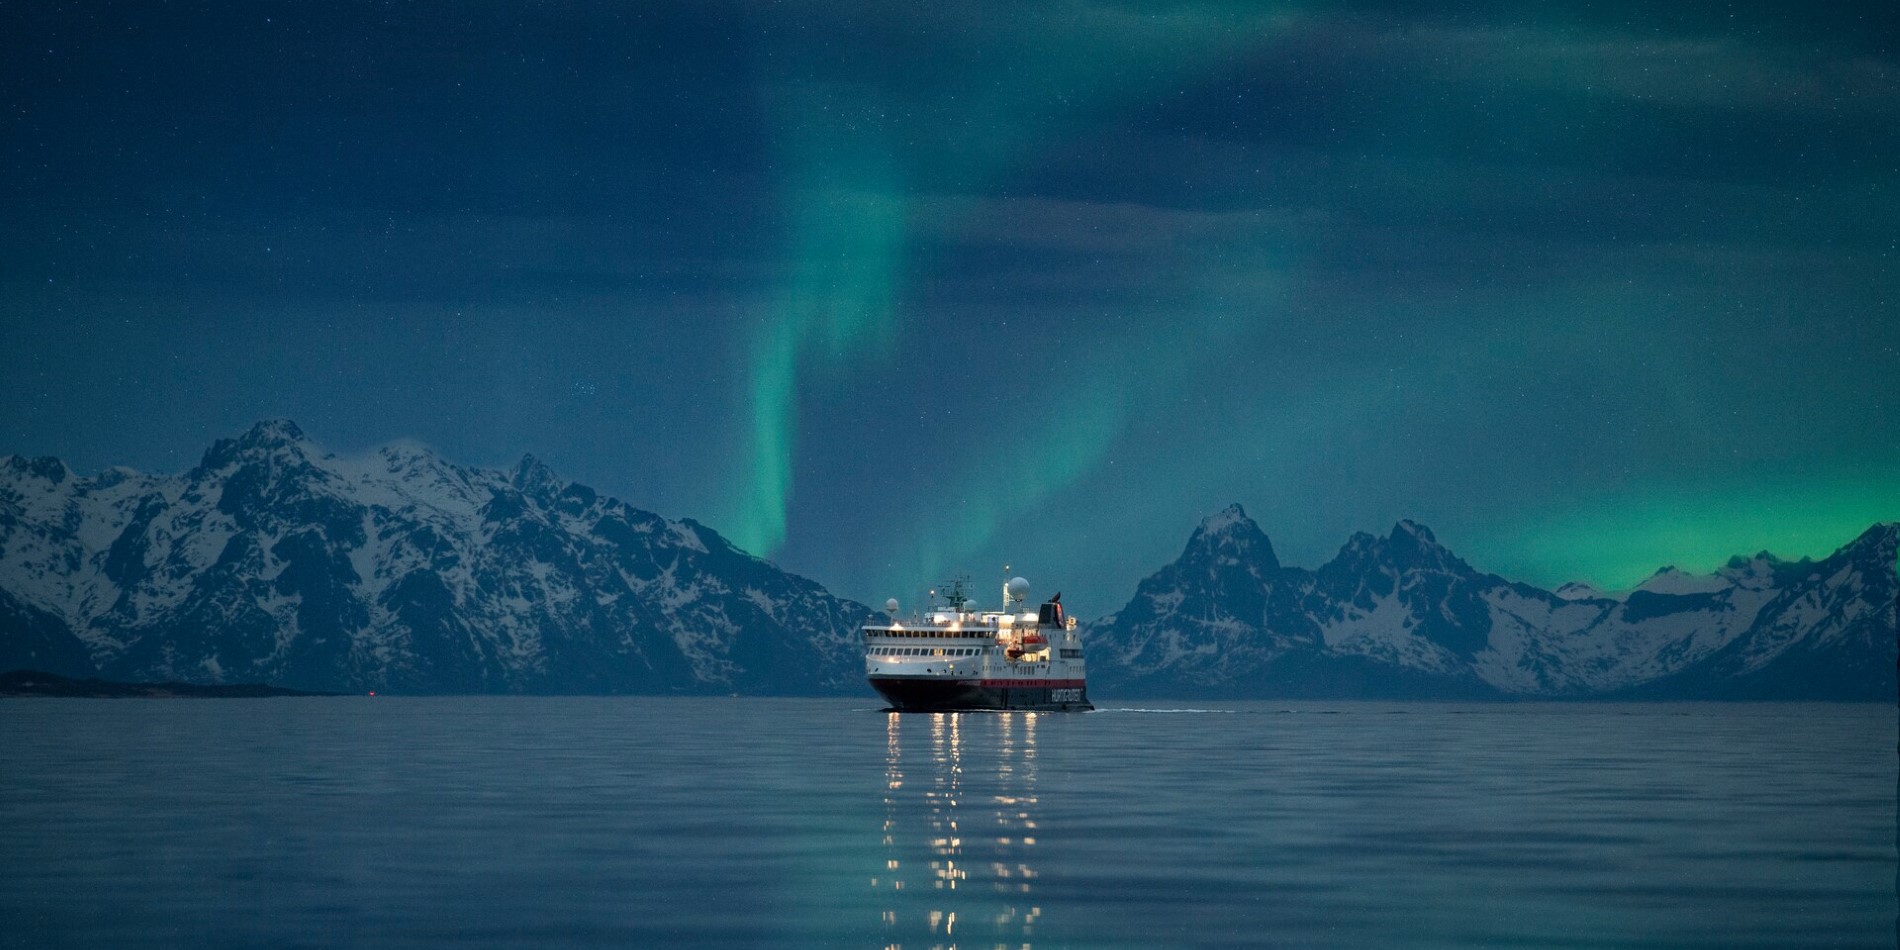 A Hurtigruten ship sailing in Norway with the Northern Lights above